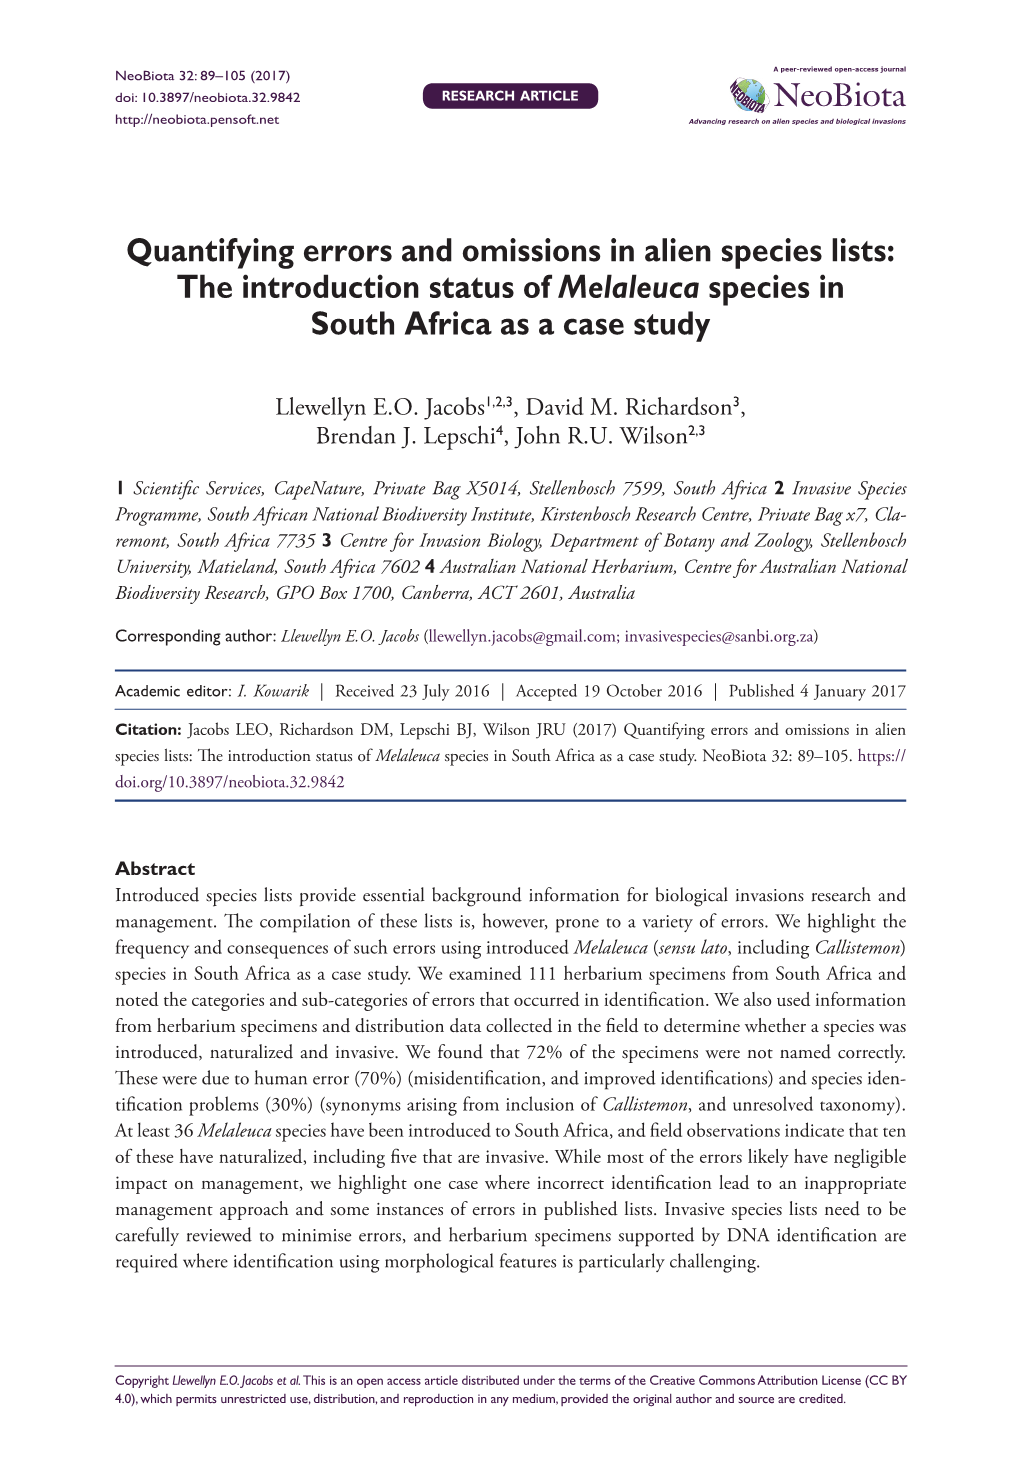 Quantifying Errors and Omissions in Alien Species Lists: the Introduction Status of Melaleuca Species in South Africa As a Case Study